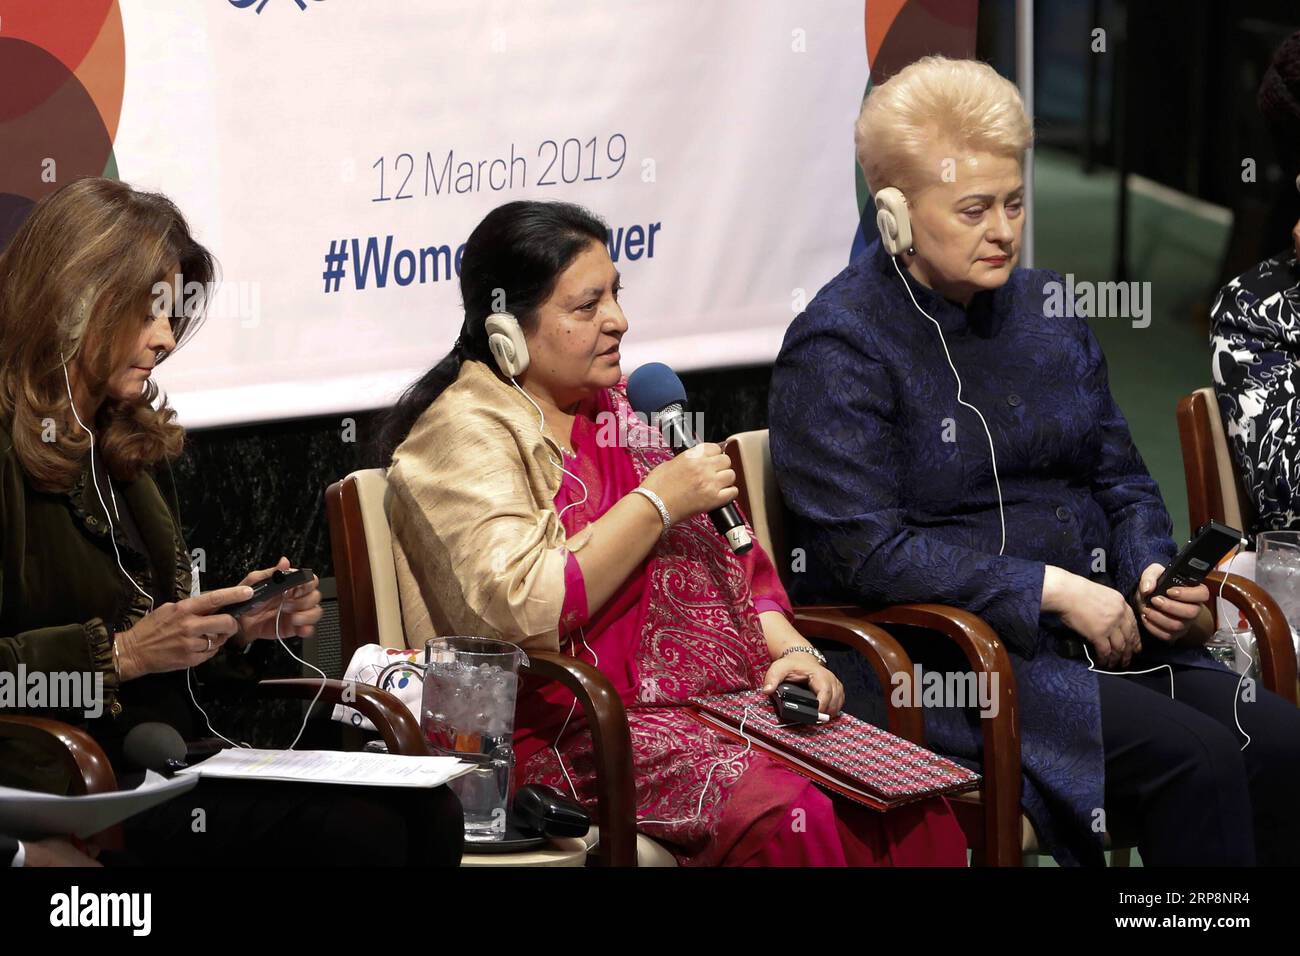 (190312) -- UNITED NATIONS, March 12, 2019 -- Nepalese President Bidhya Devi Bhandari (C) speaks during a round-table discussion of a high-level event on Women in Power at the UN headquarters in New York, on March 12, 2019. UN General Assembly President Maria Fernanda Espinosa Garces hosted the high-level event on Women in Power on Tuesday and highlighted the benefits of women s participation in politics, including economic stability and promotion of fairer laws. ) UN-HIGH-LEVEL EVENT-WOMEN IN POWER LIxMUZI PUBLICATIONxNOTxINxCHN Stock Photo